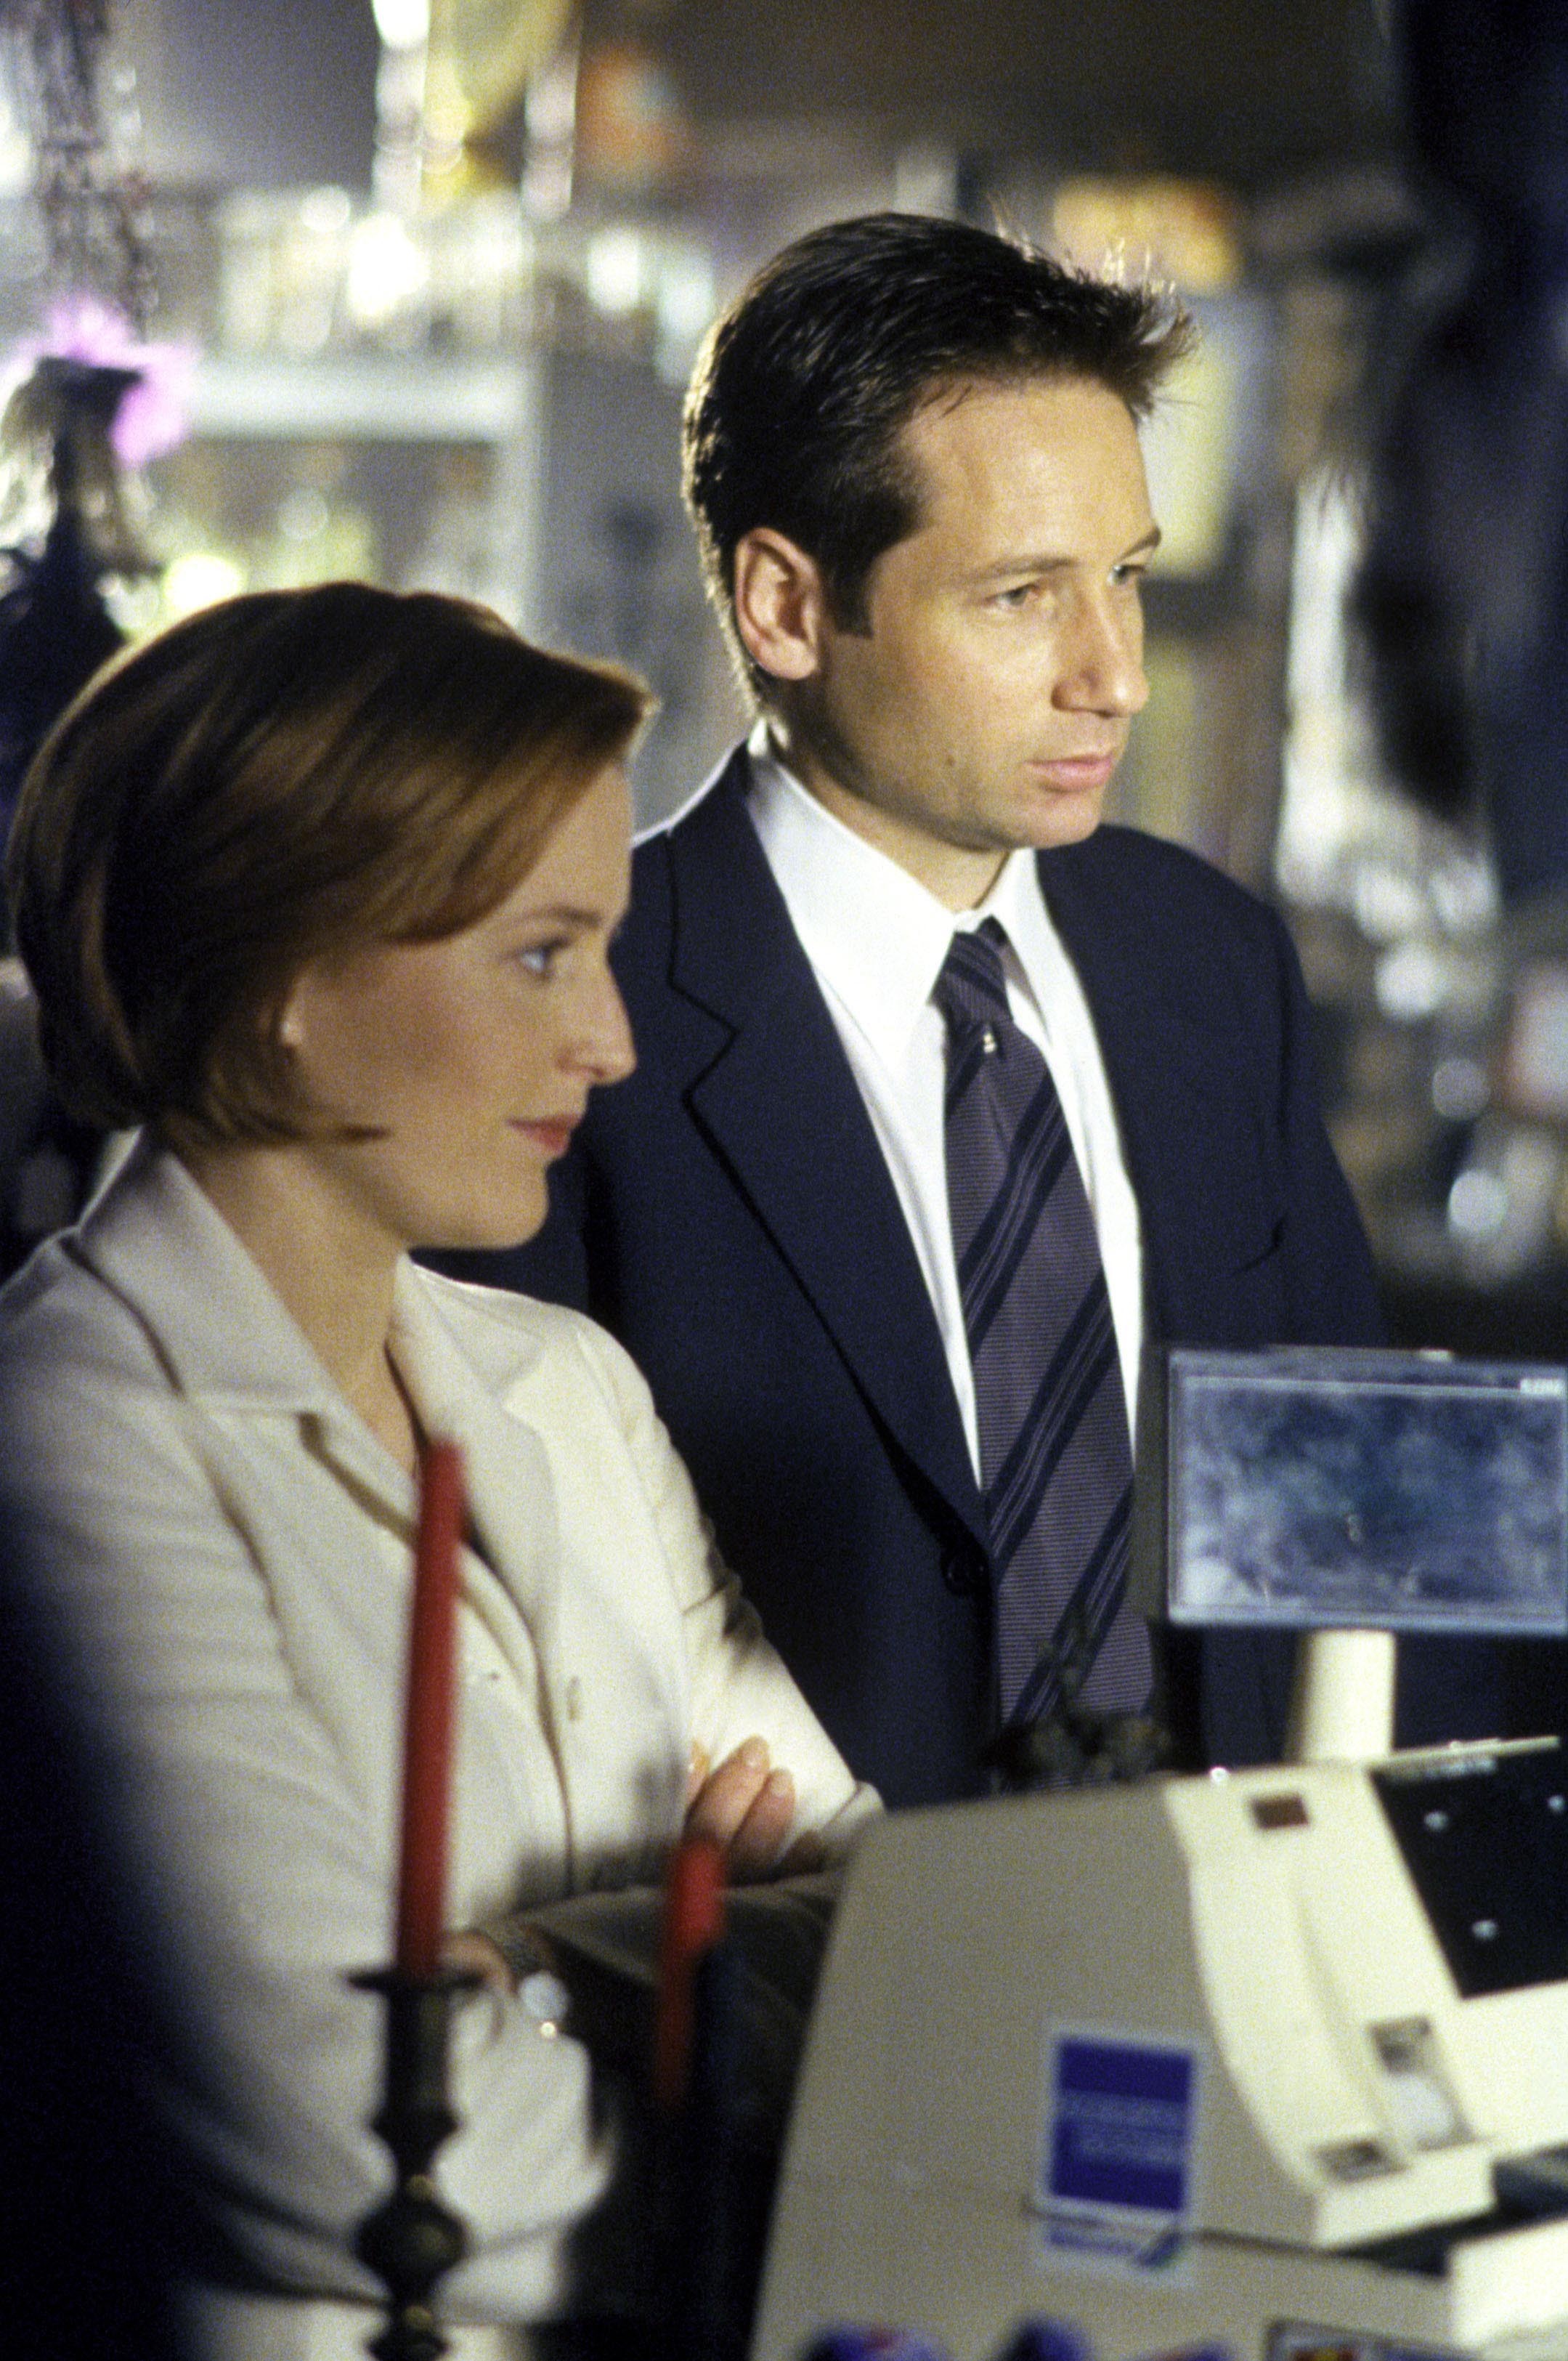 Mulder and Scully in the lab, doing science.